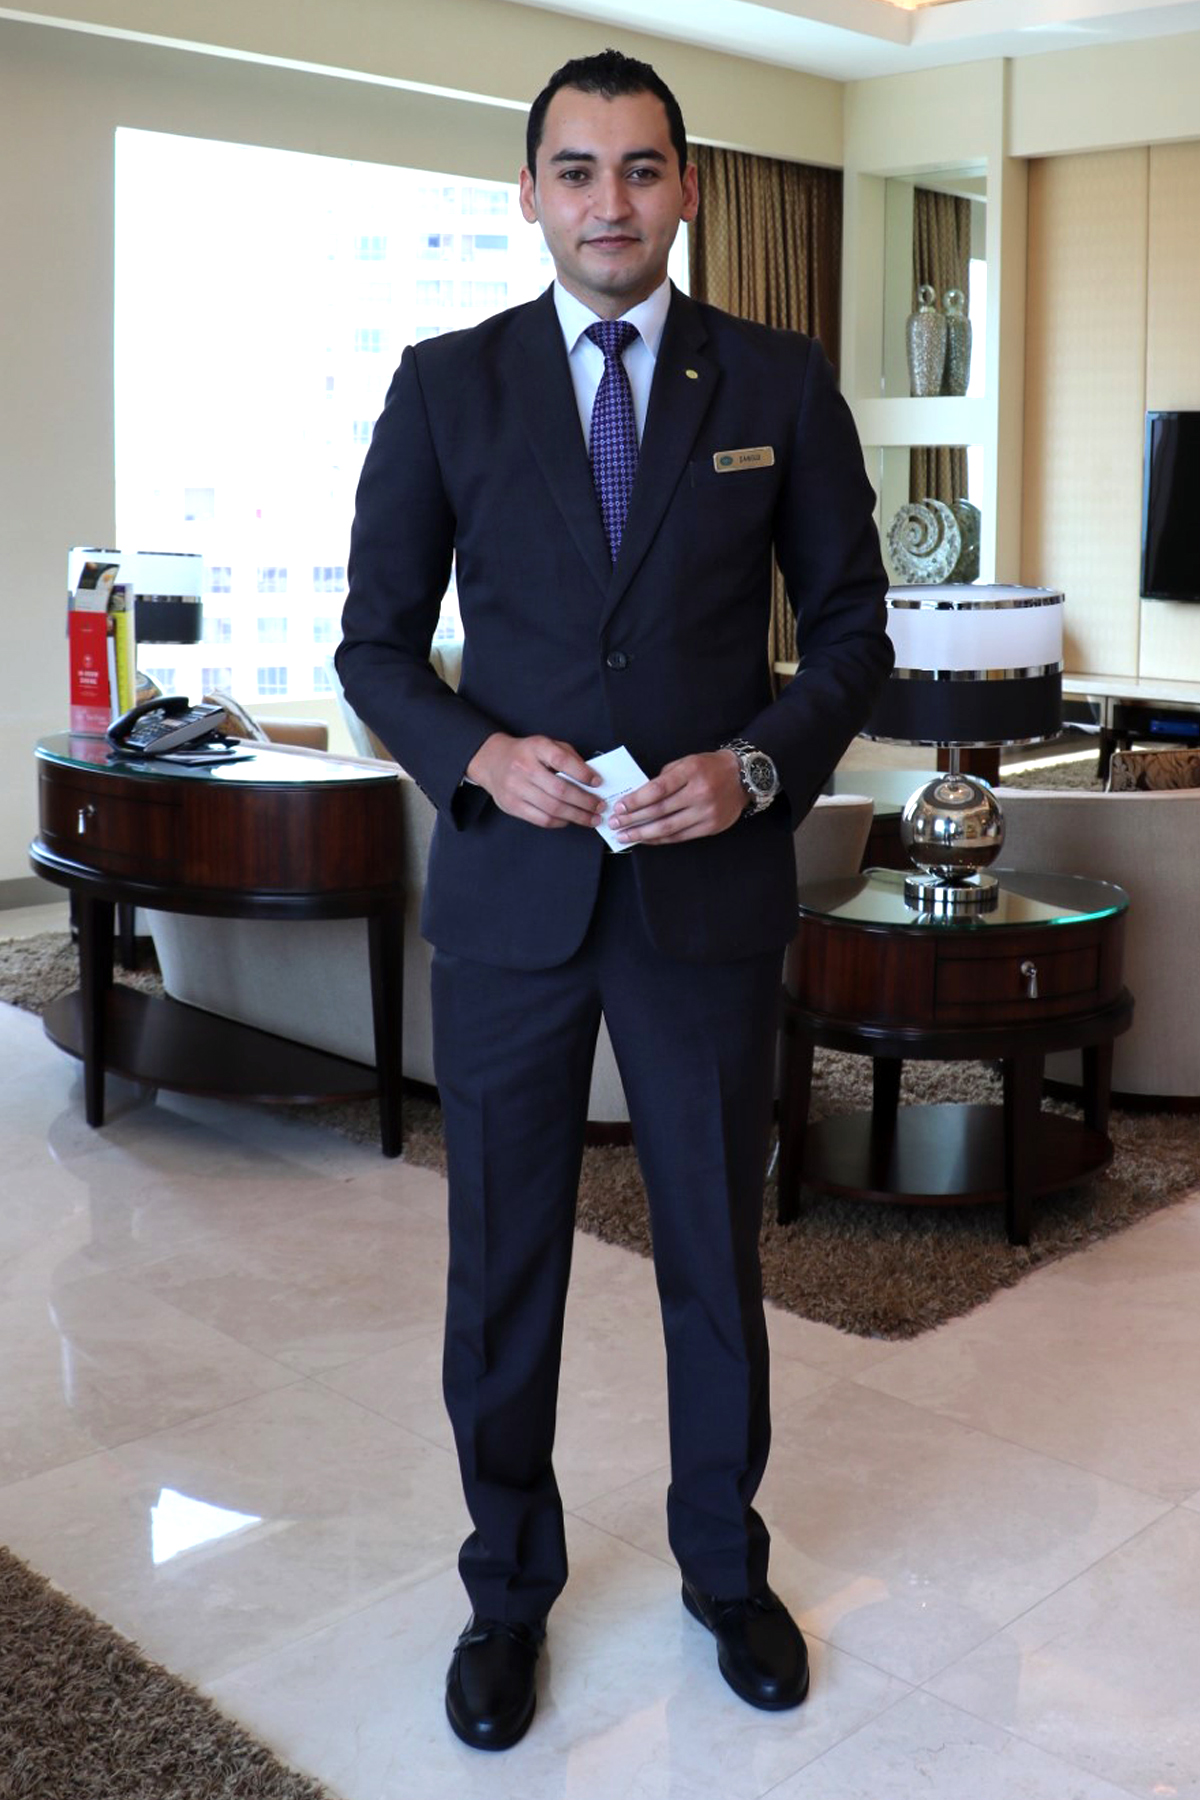 A full body shot of Mohammed Dawoud, a full-time guest relations manager dressed in a suit for work.